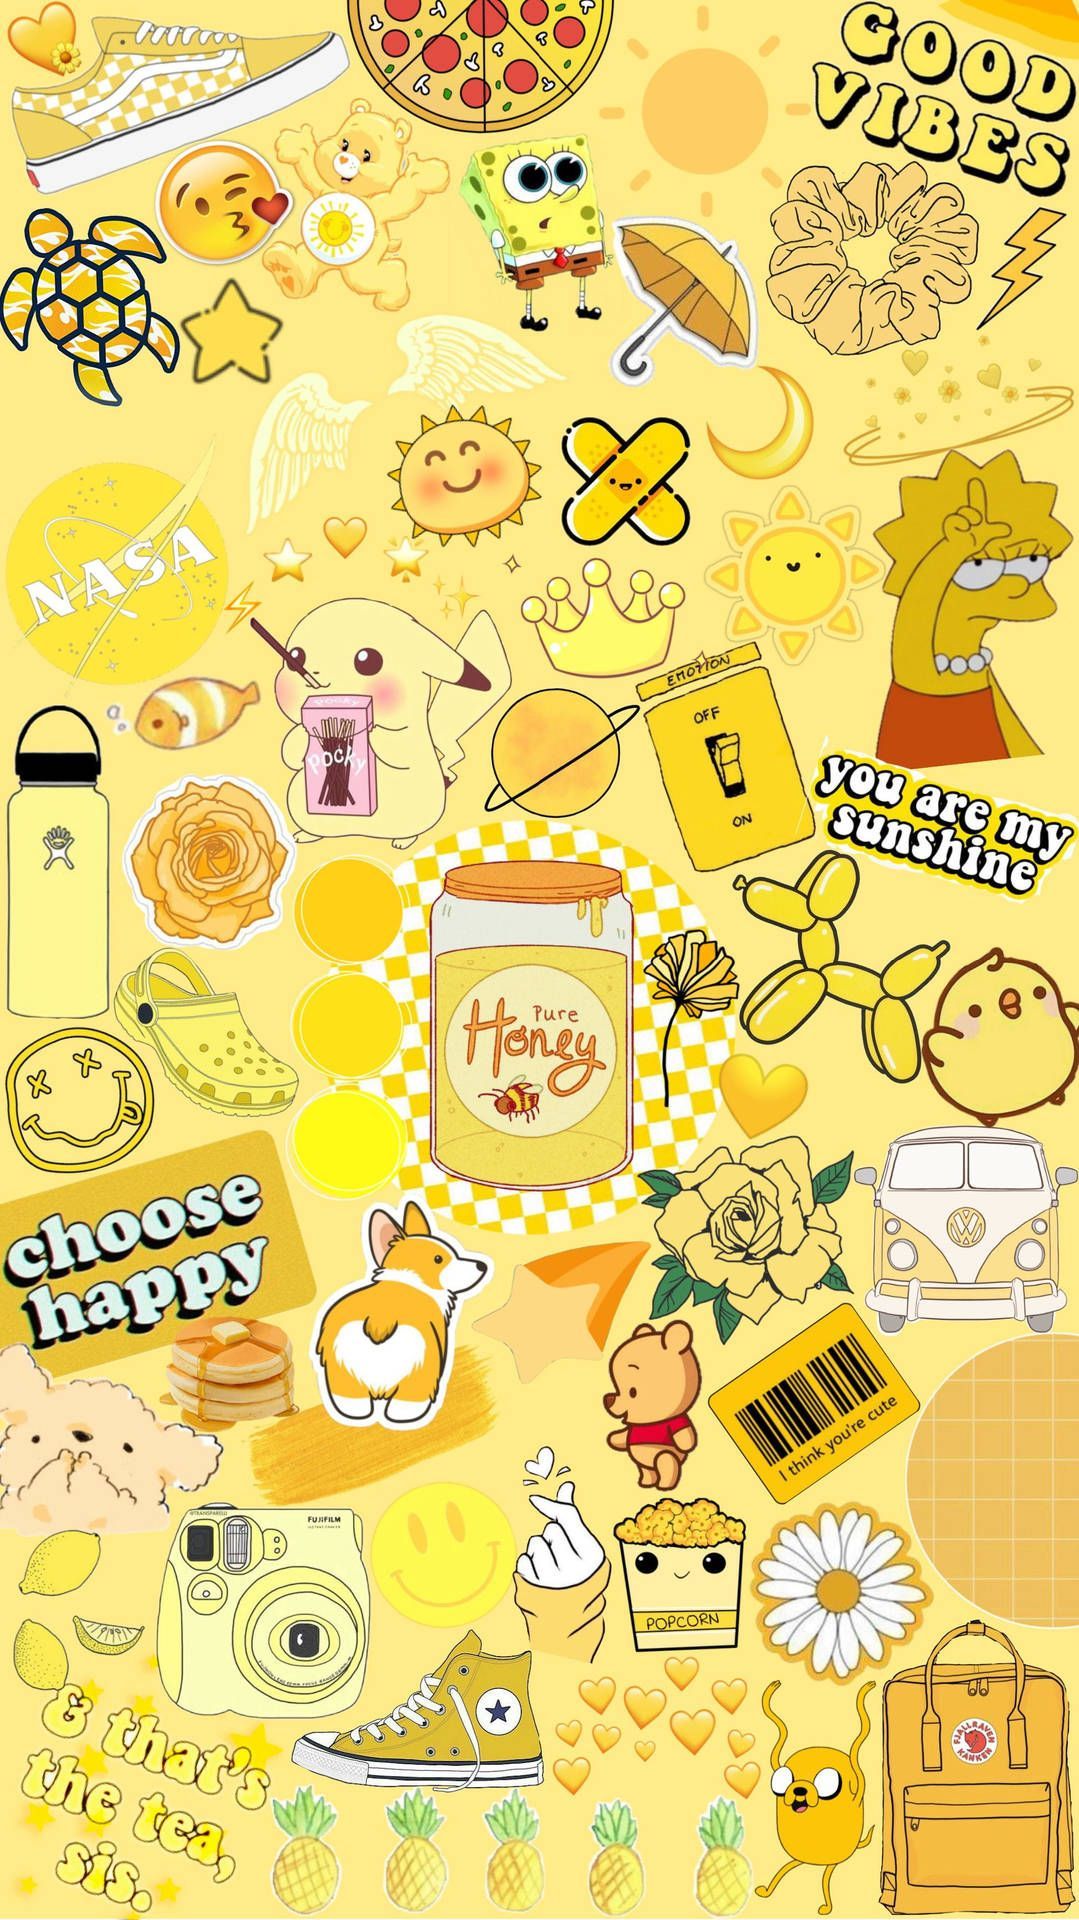 A yellow poster with lots of stickers on it - Yellow, honey, pastel, light yellow, pastel yellow